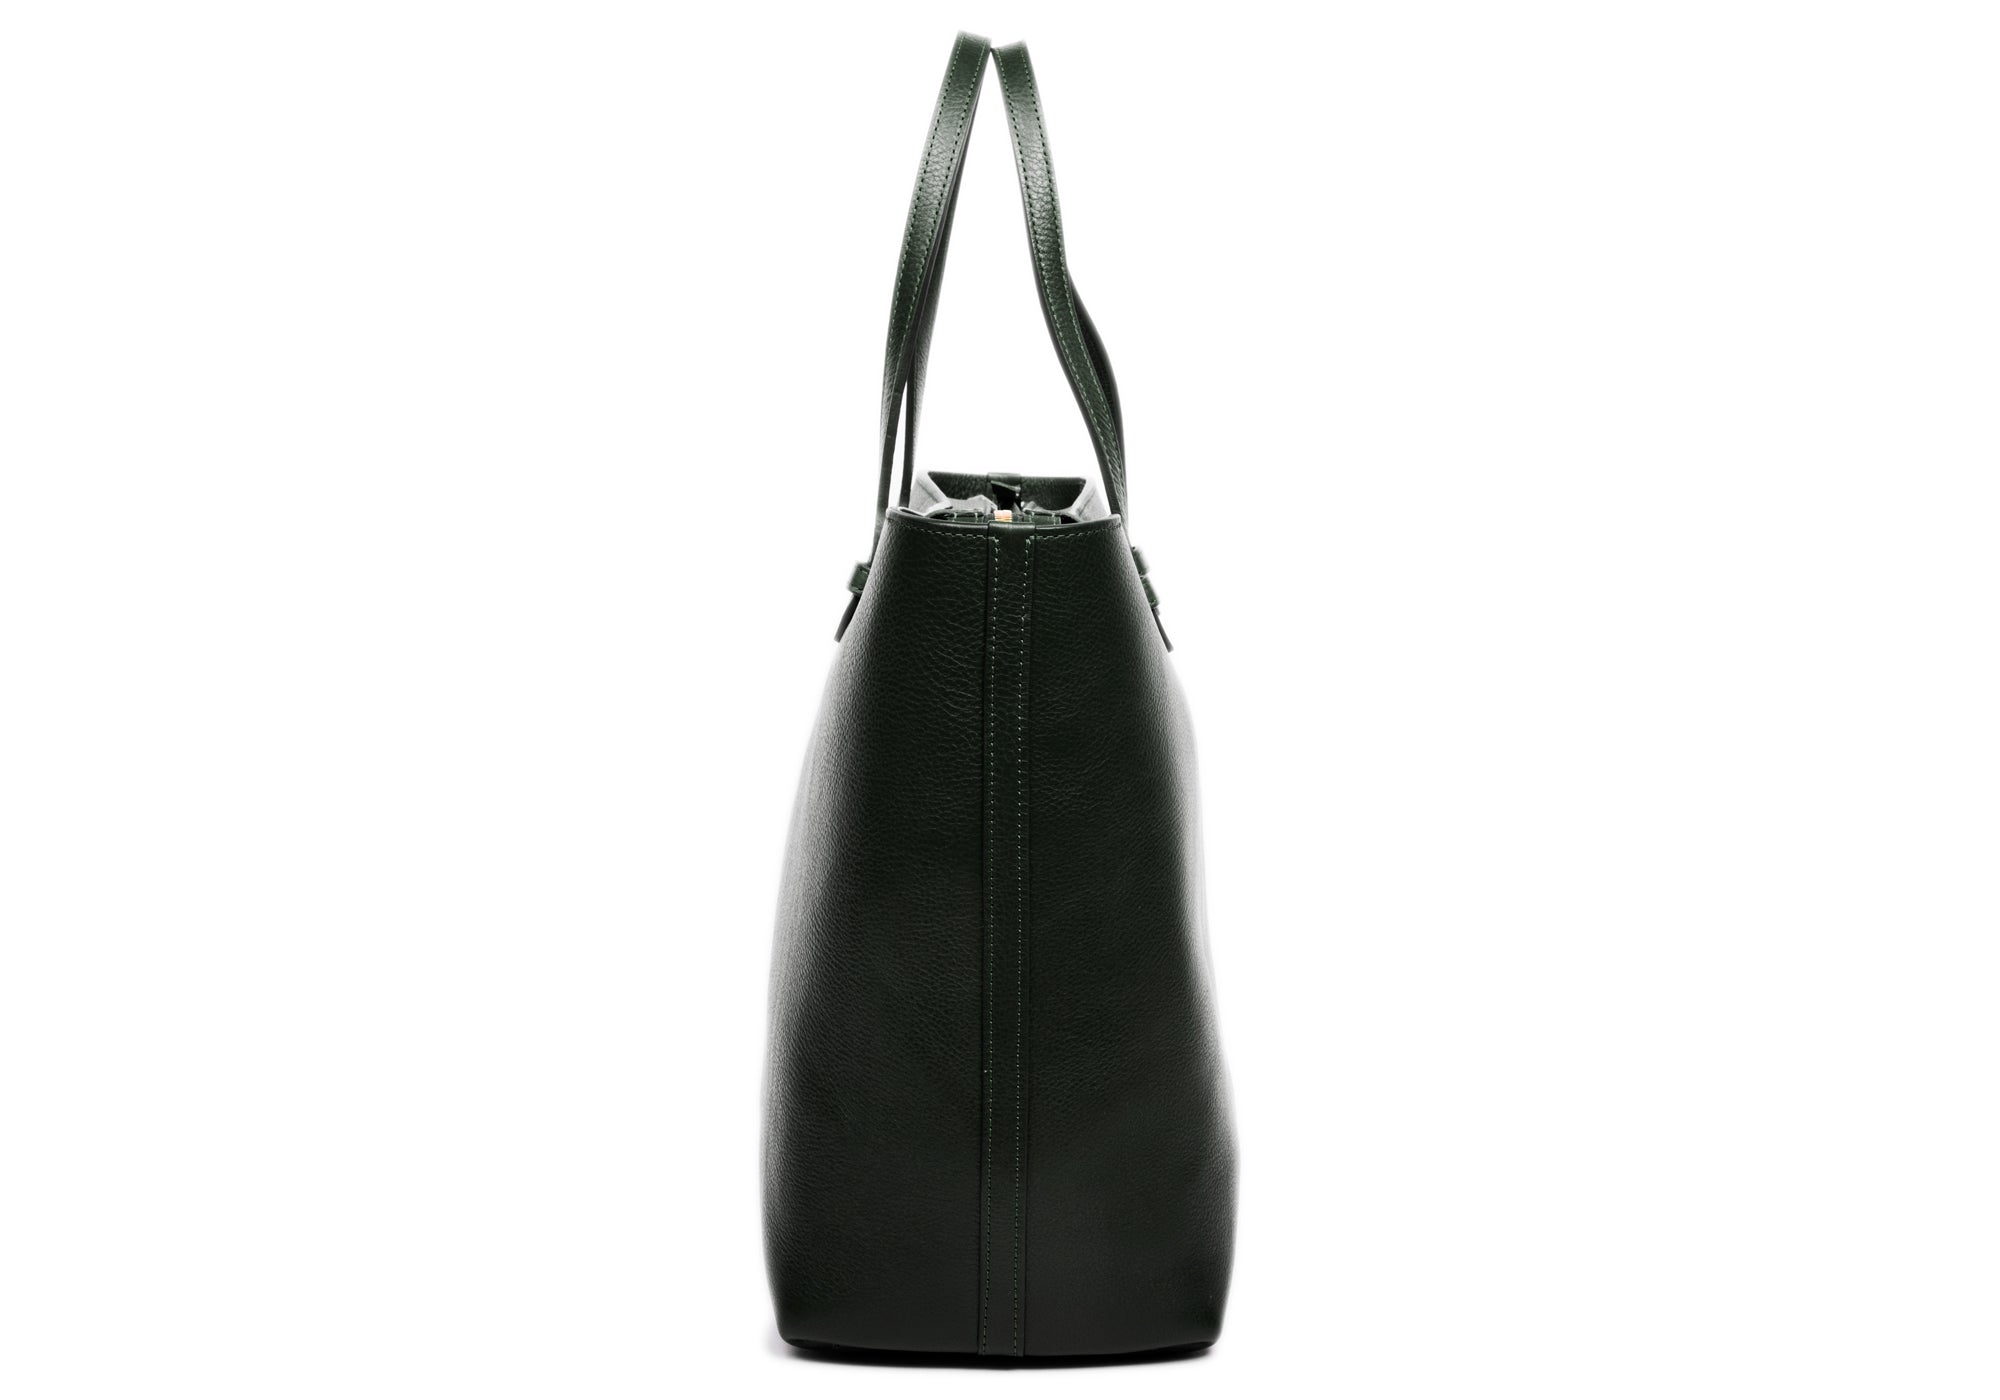 No. 12 Leather Tote Green